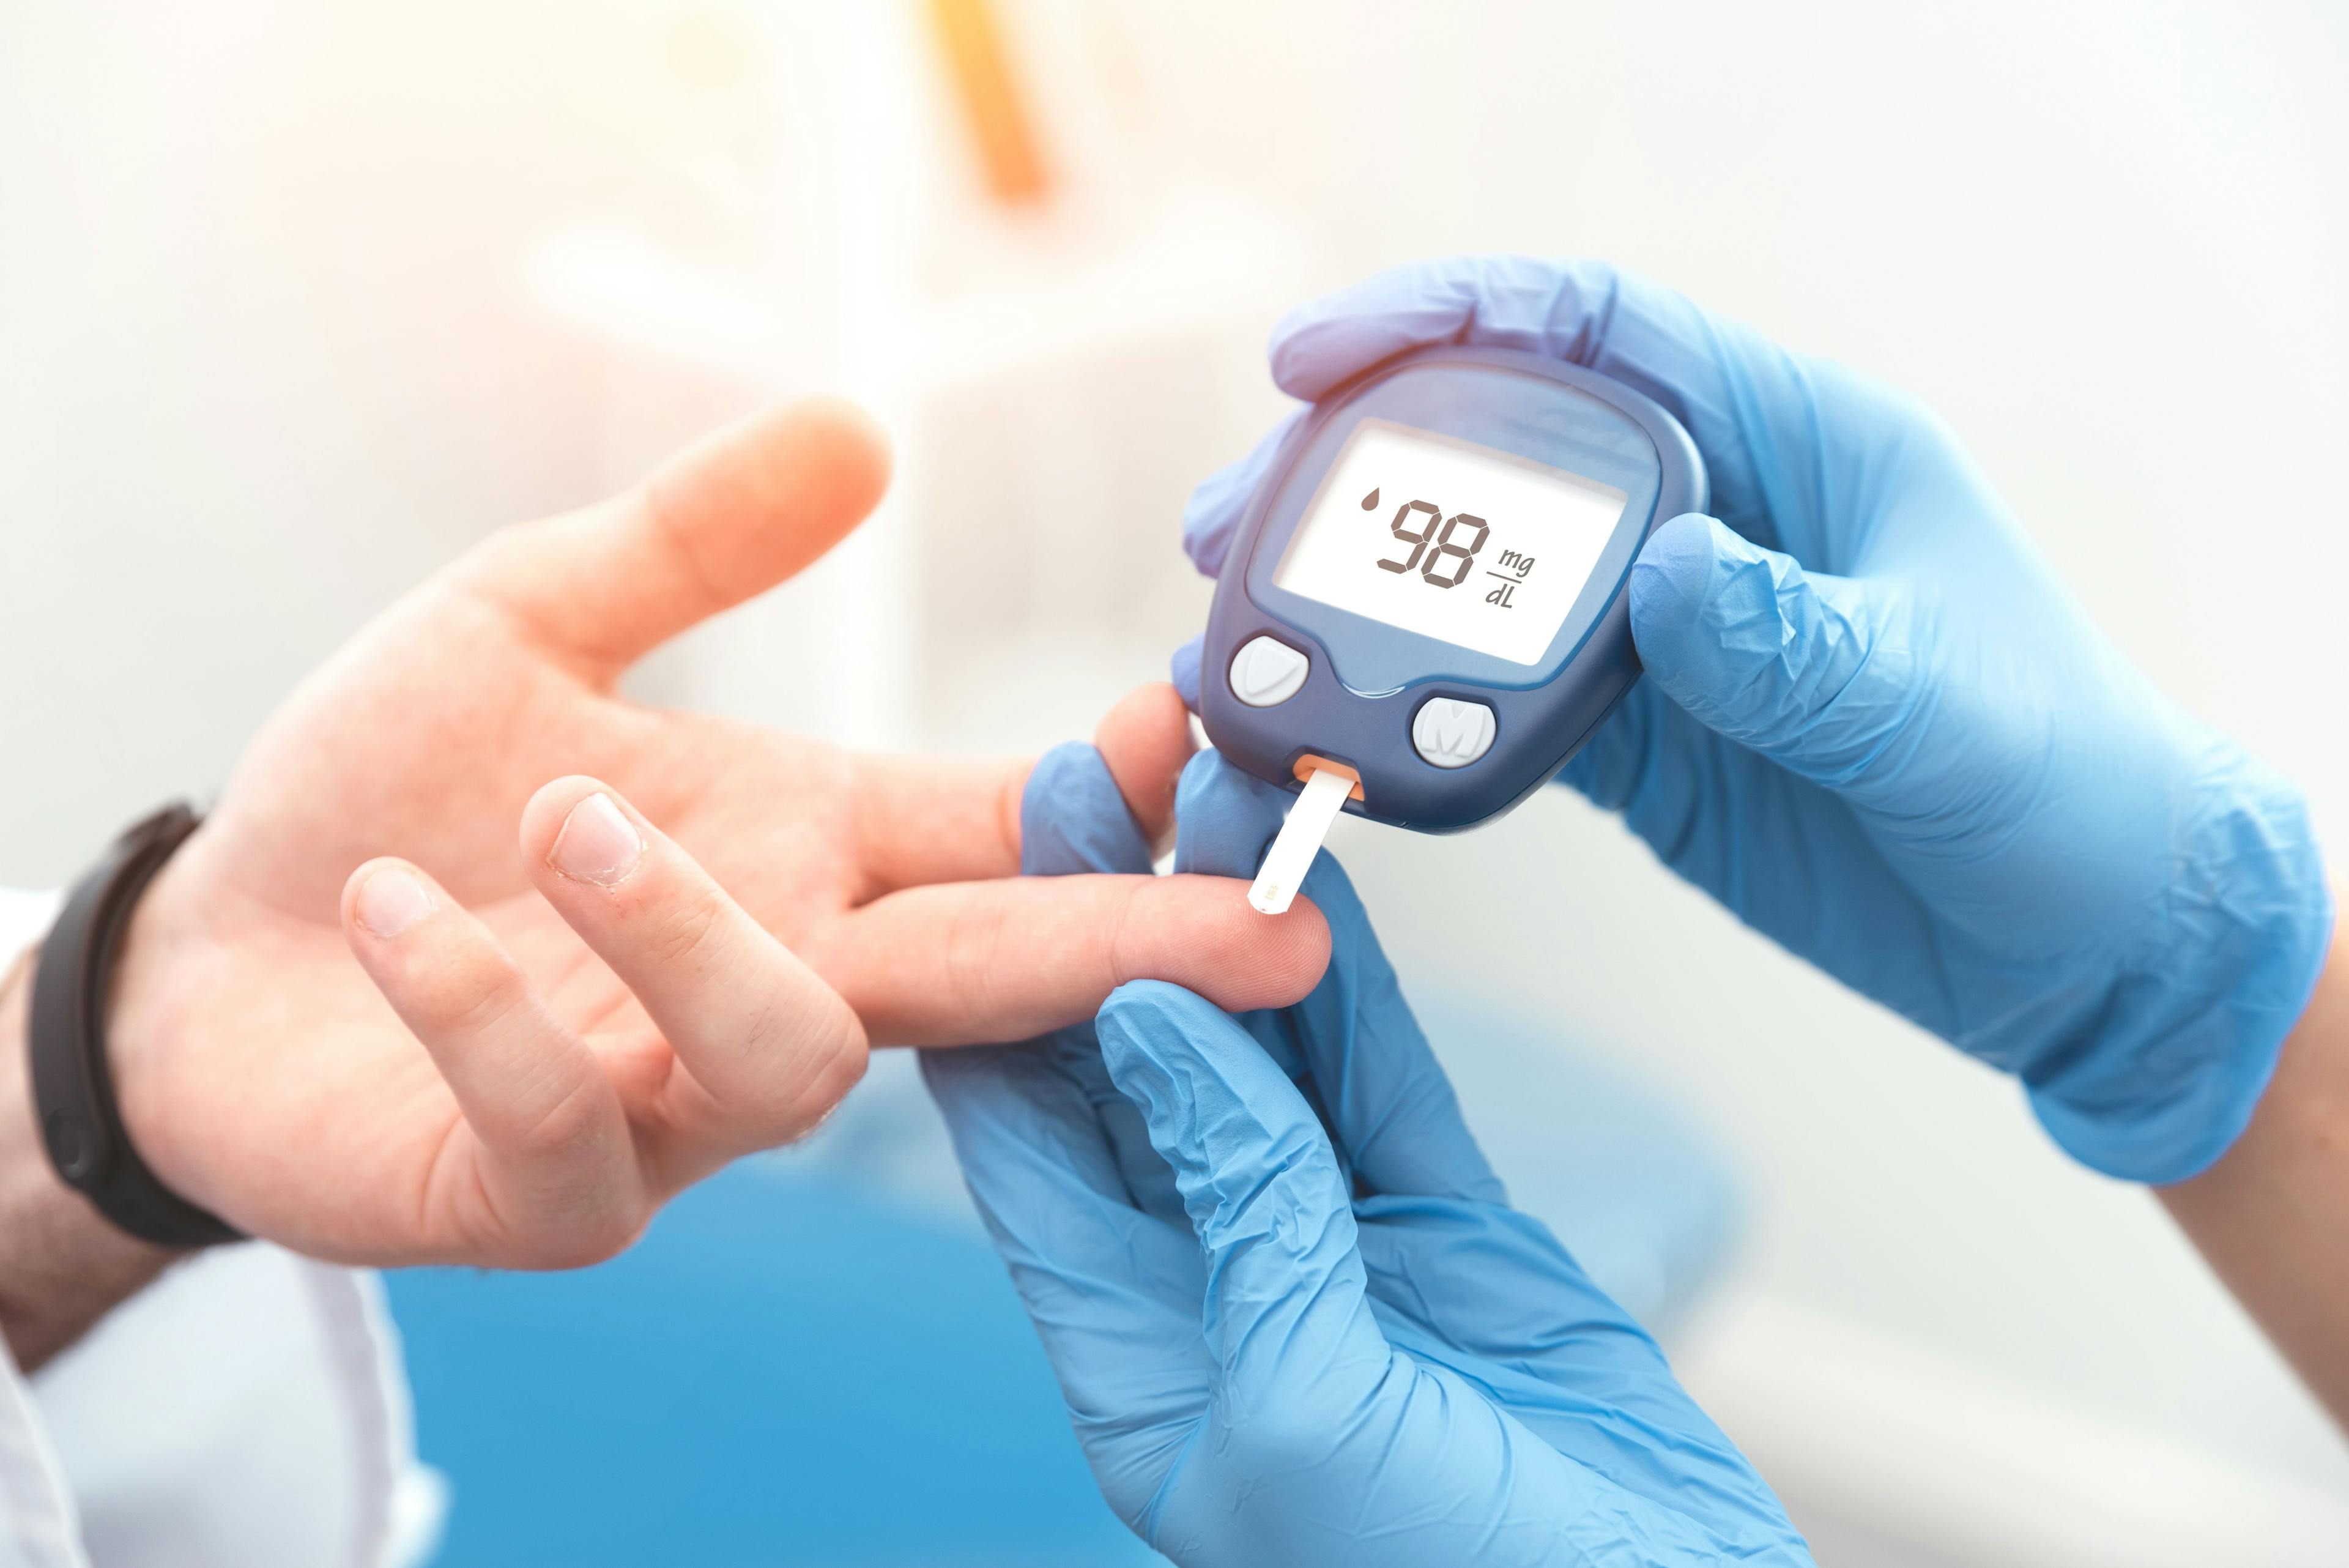 Health care worker testing a patient's blood sugar level